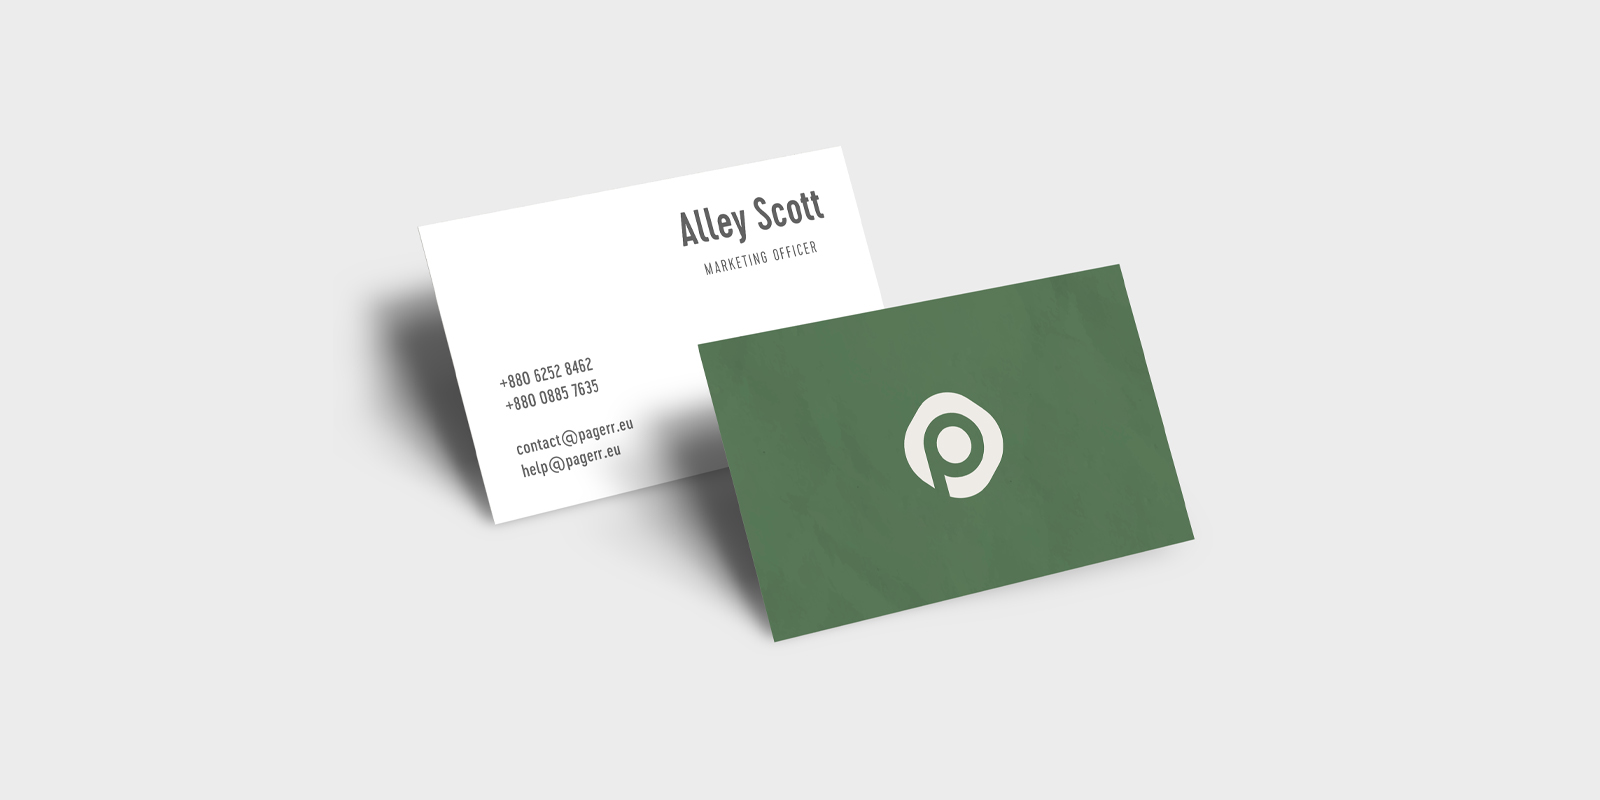 Simple business cards in Warsaw - Print with Pagerr